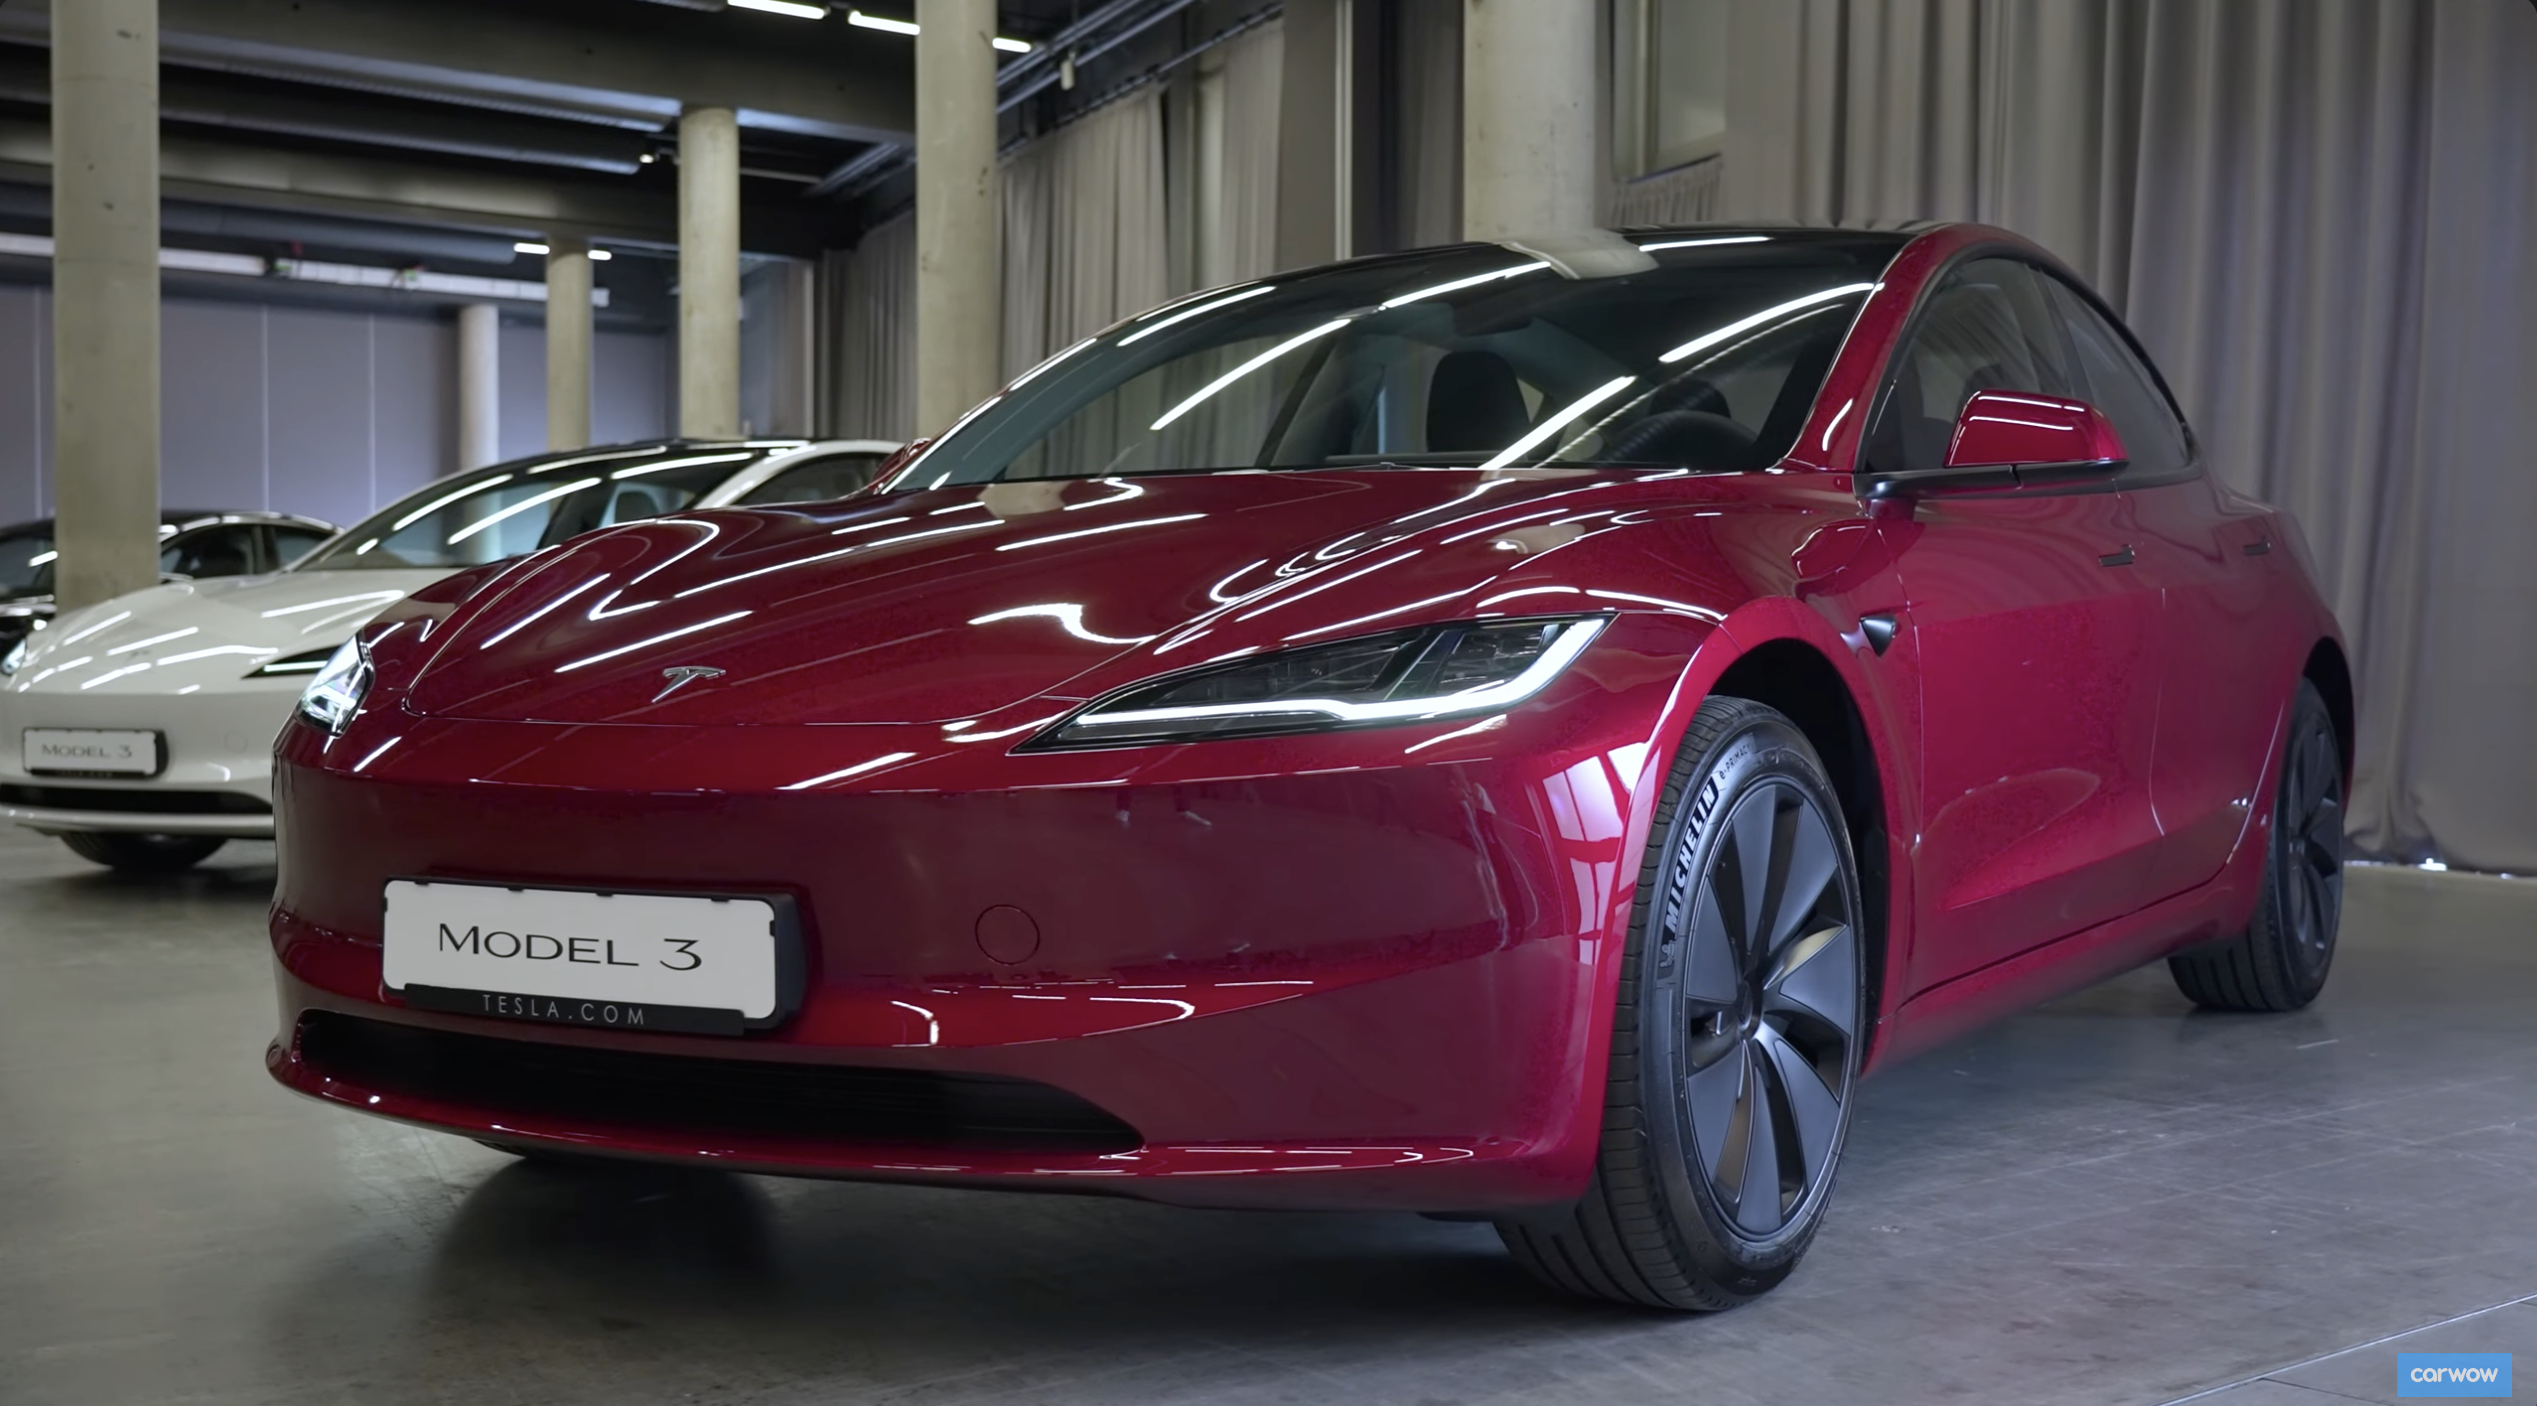 Tesla Model 3 Highland Is Coming To U.S.: The Best One-Minute Review